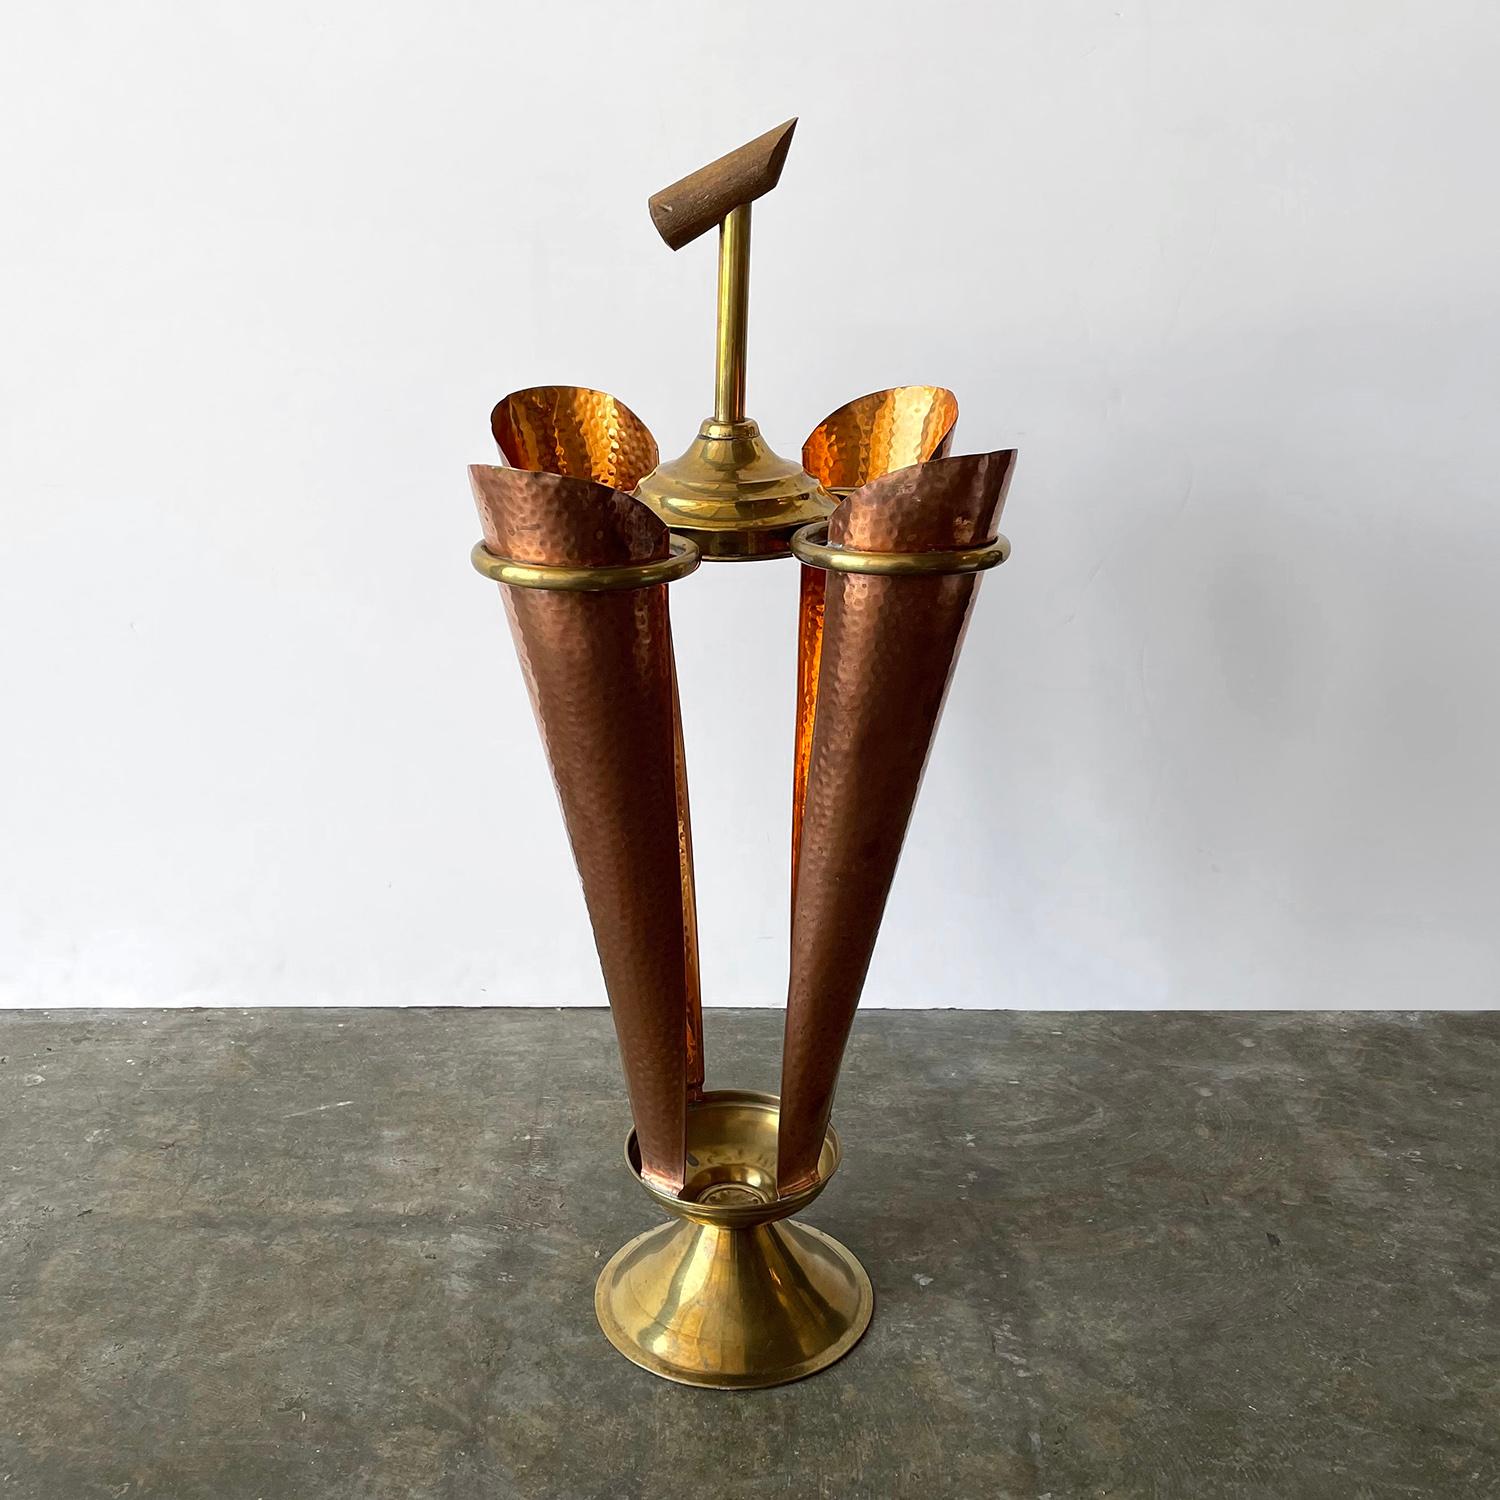 French hammered copper and brass umbrella holder
Rustic piece that has lived well with more life to give!
Perfectly imperfect hammered brass sleeves
Brass details and wooden handle
Patina from age and use
Timeless classic 
